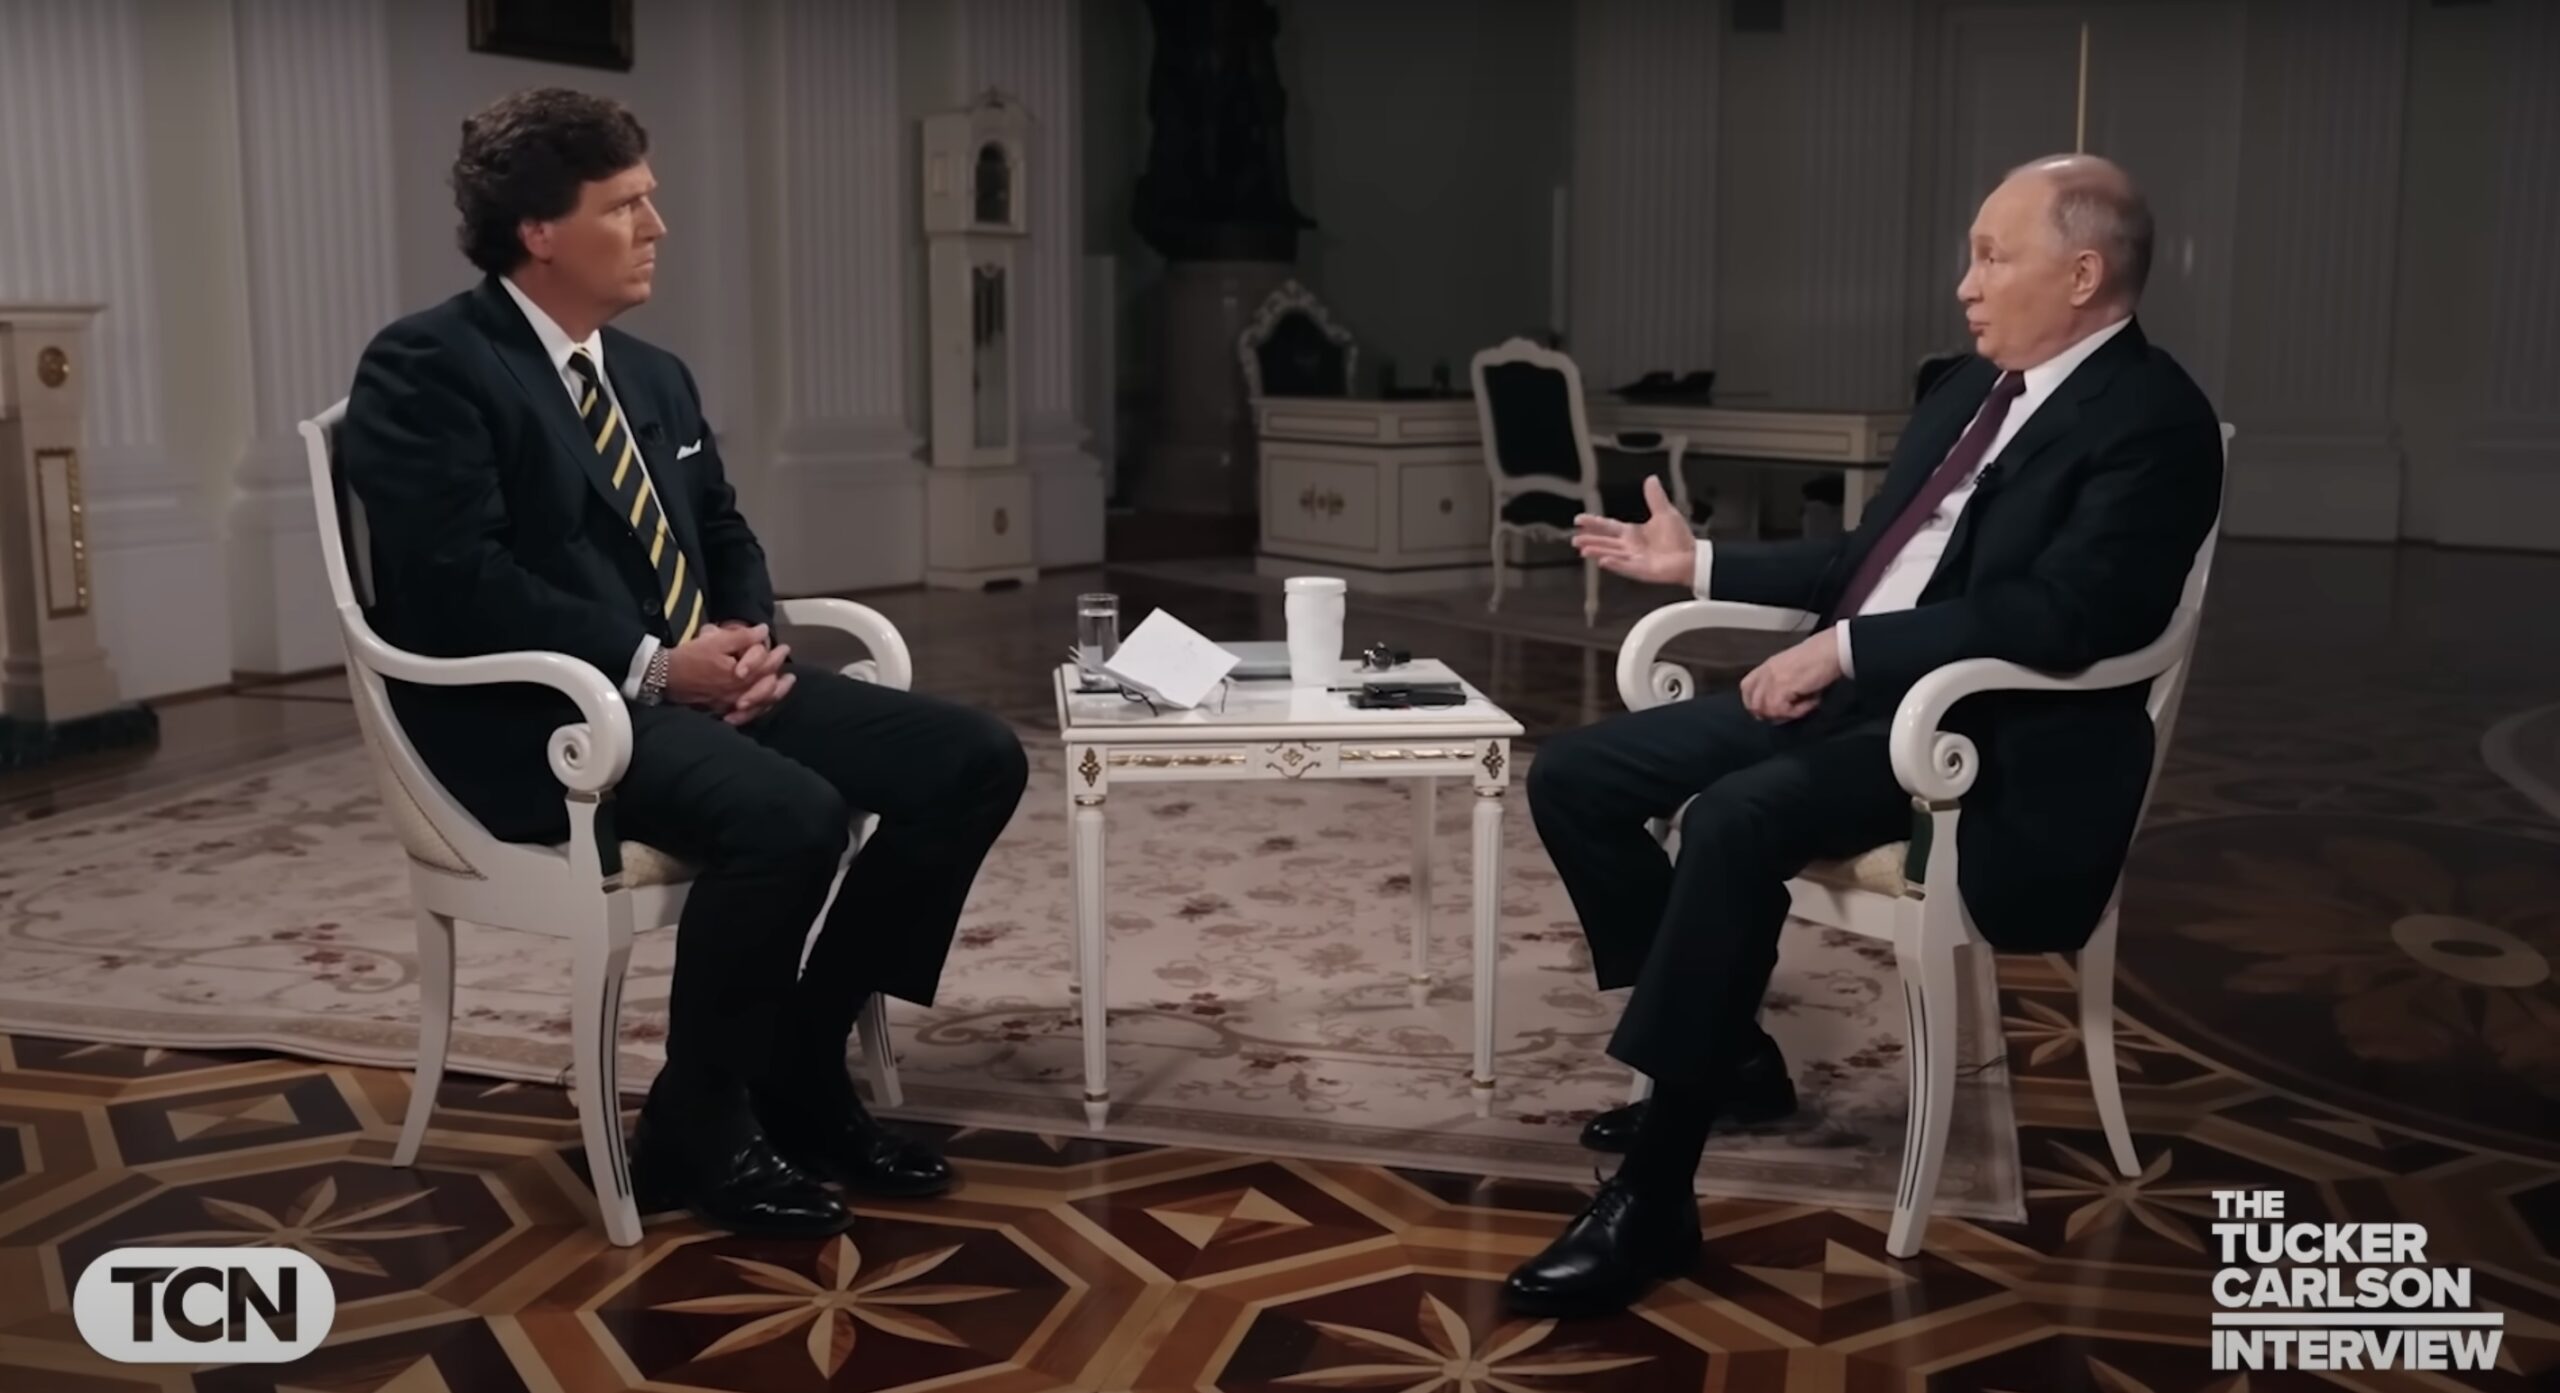 Putin Complains Tucker Carlson Gave Him Softball Questions: ‘I Didn’t Get Complete Satisfaction From This Interview’